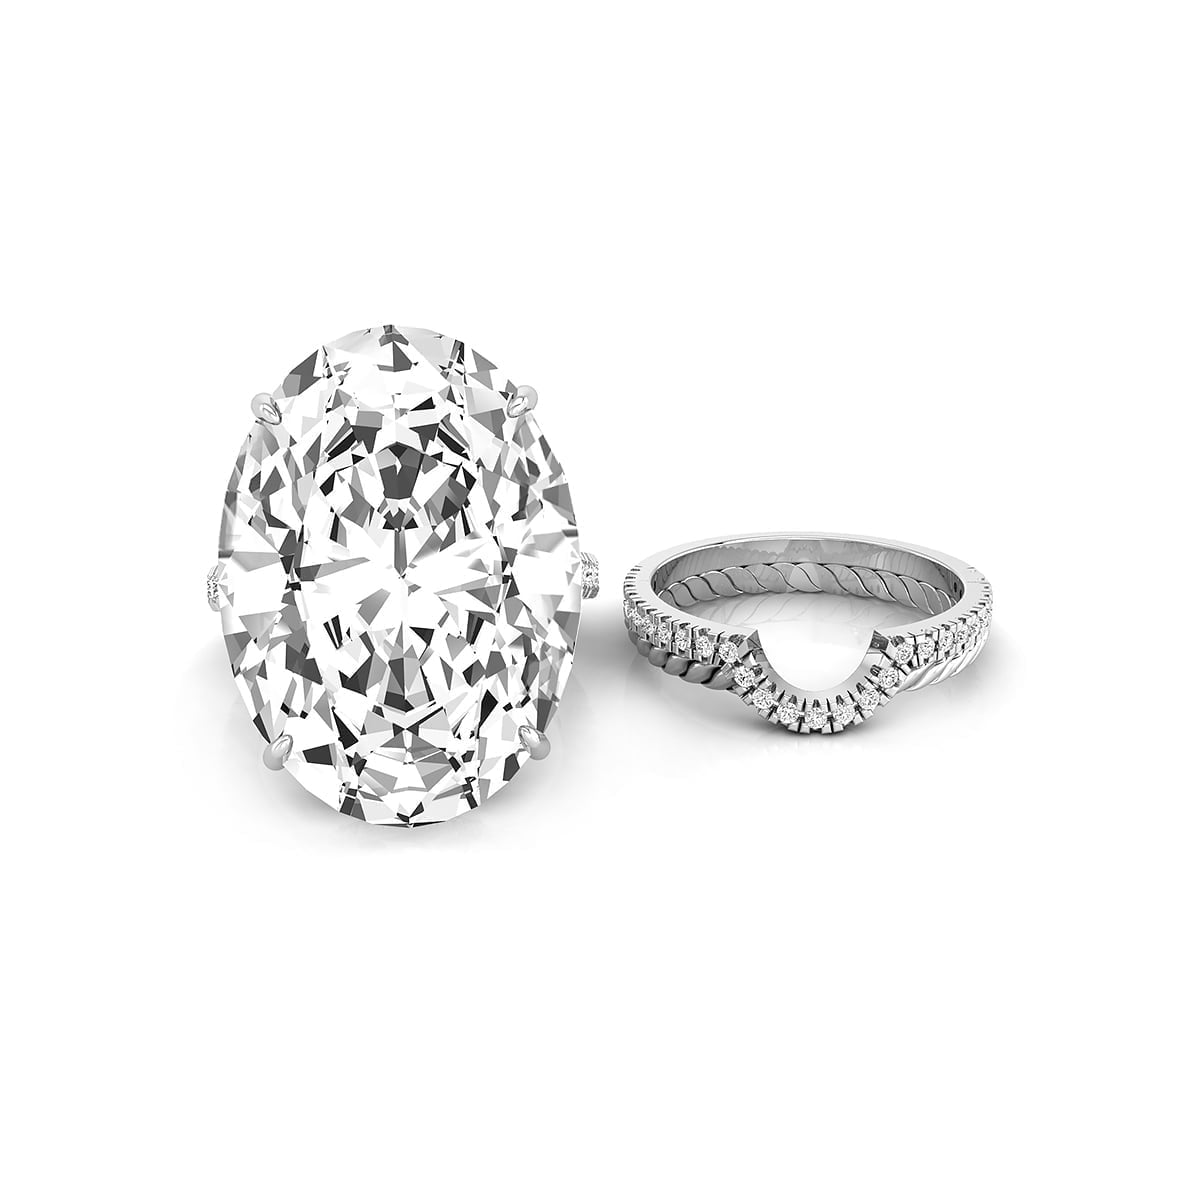 Oval Cut White CZ Stone White Gold Over Halo Wedding Ring Set For Women